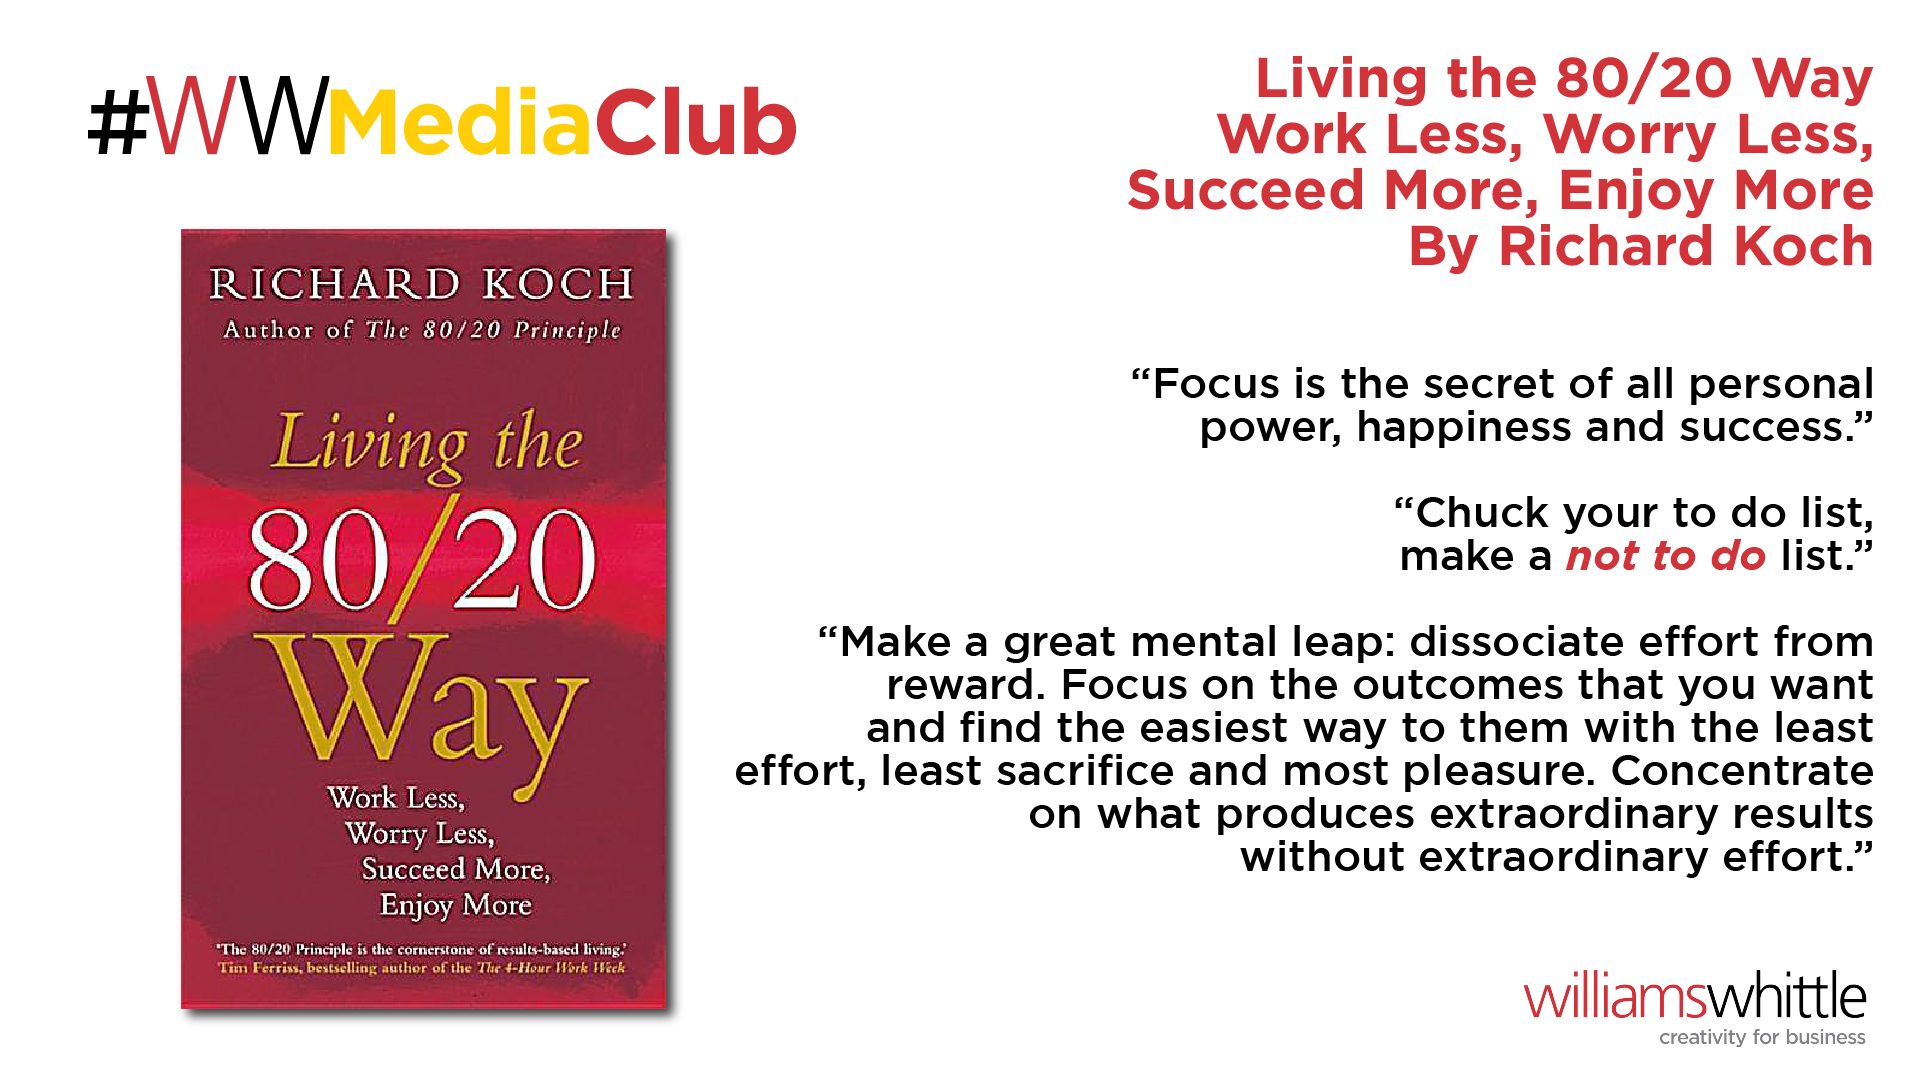 Living the 80/20 Way: Work Less, Worry Less, Succeed More, Enjoy More